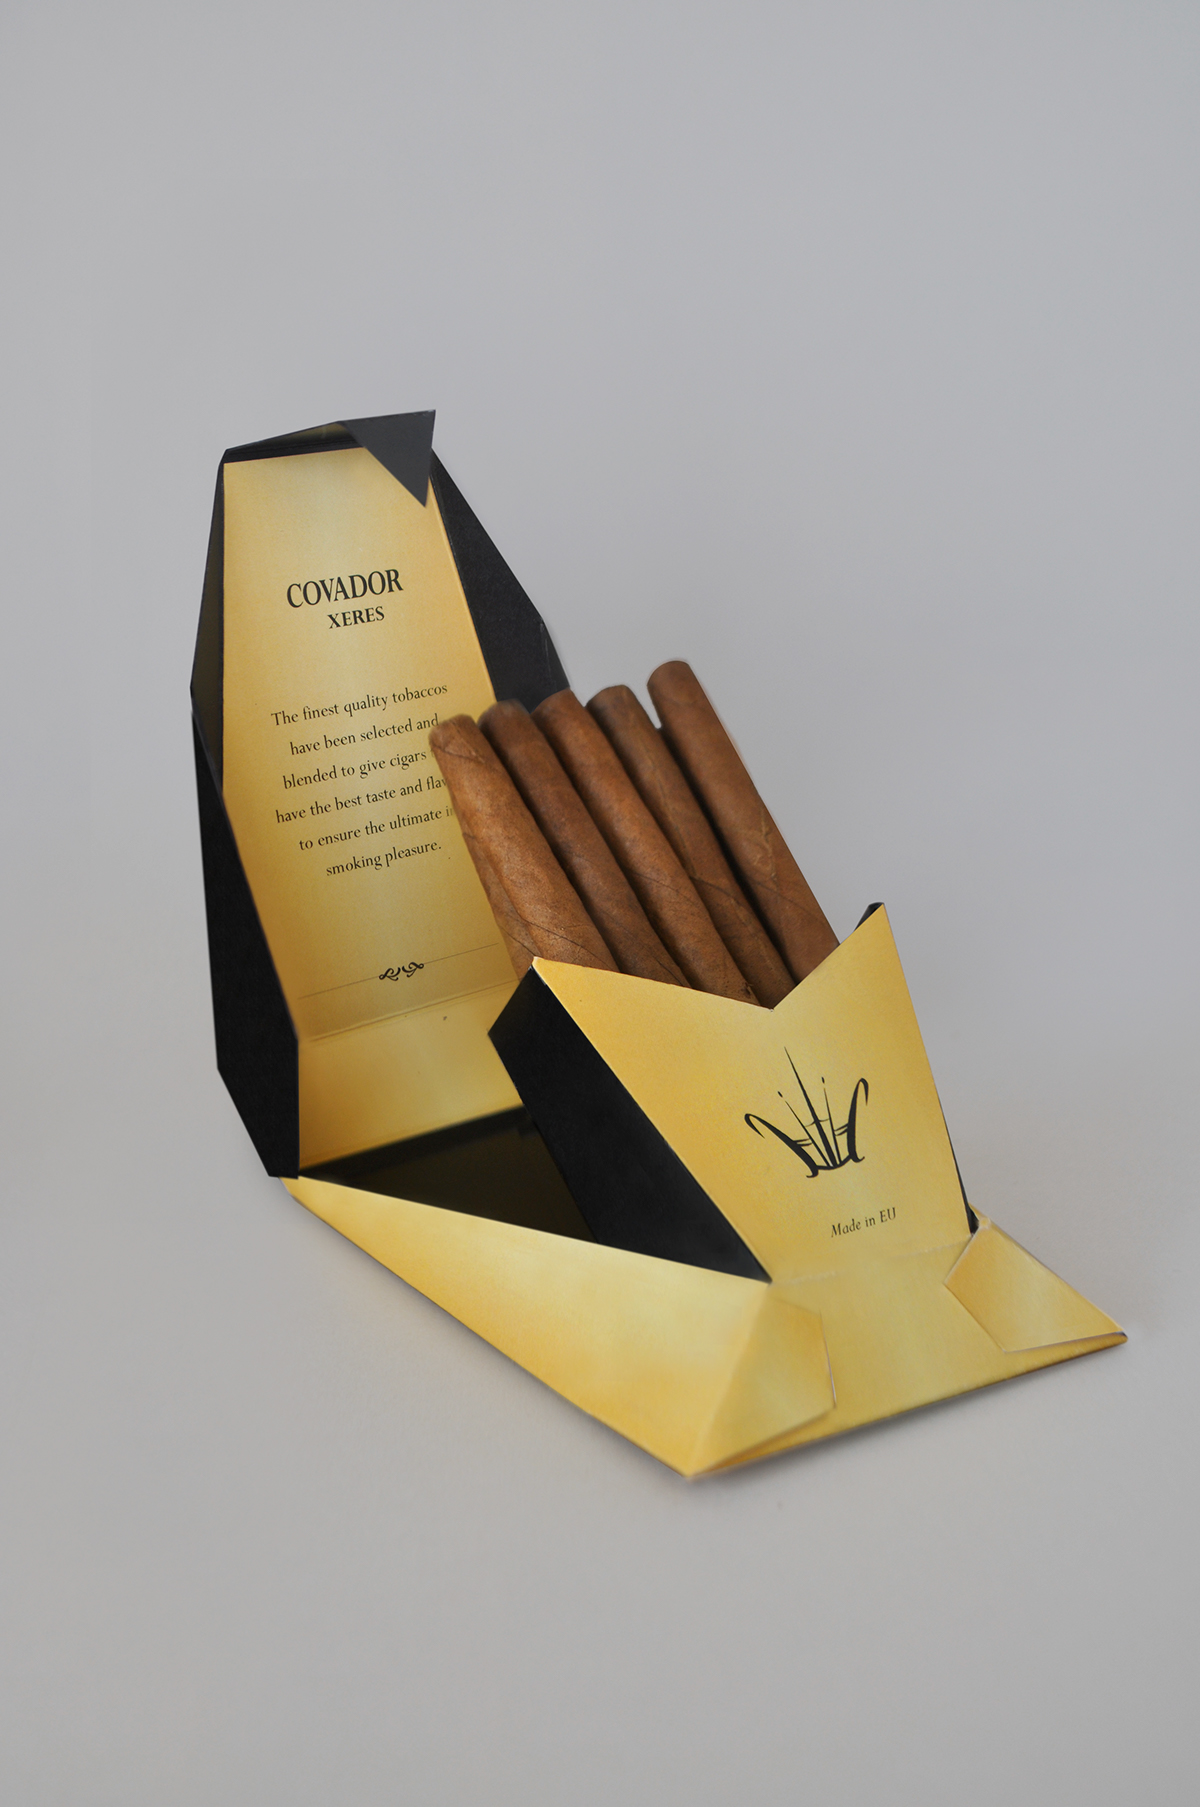 cigar tobacco cigarette premium eco-friendly luxury High End Quality user friendly user experience box boxes wrapping